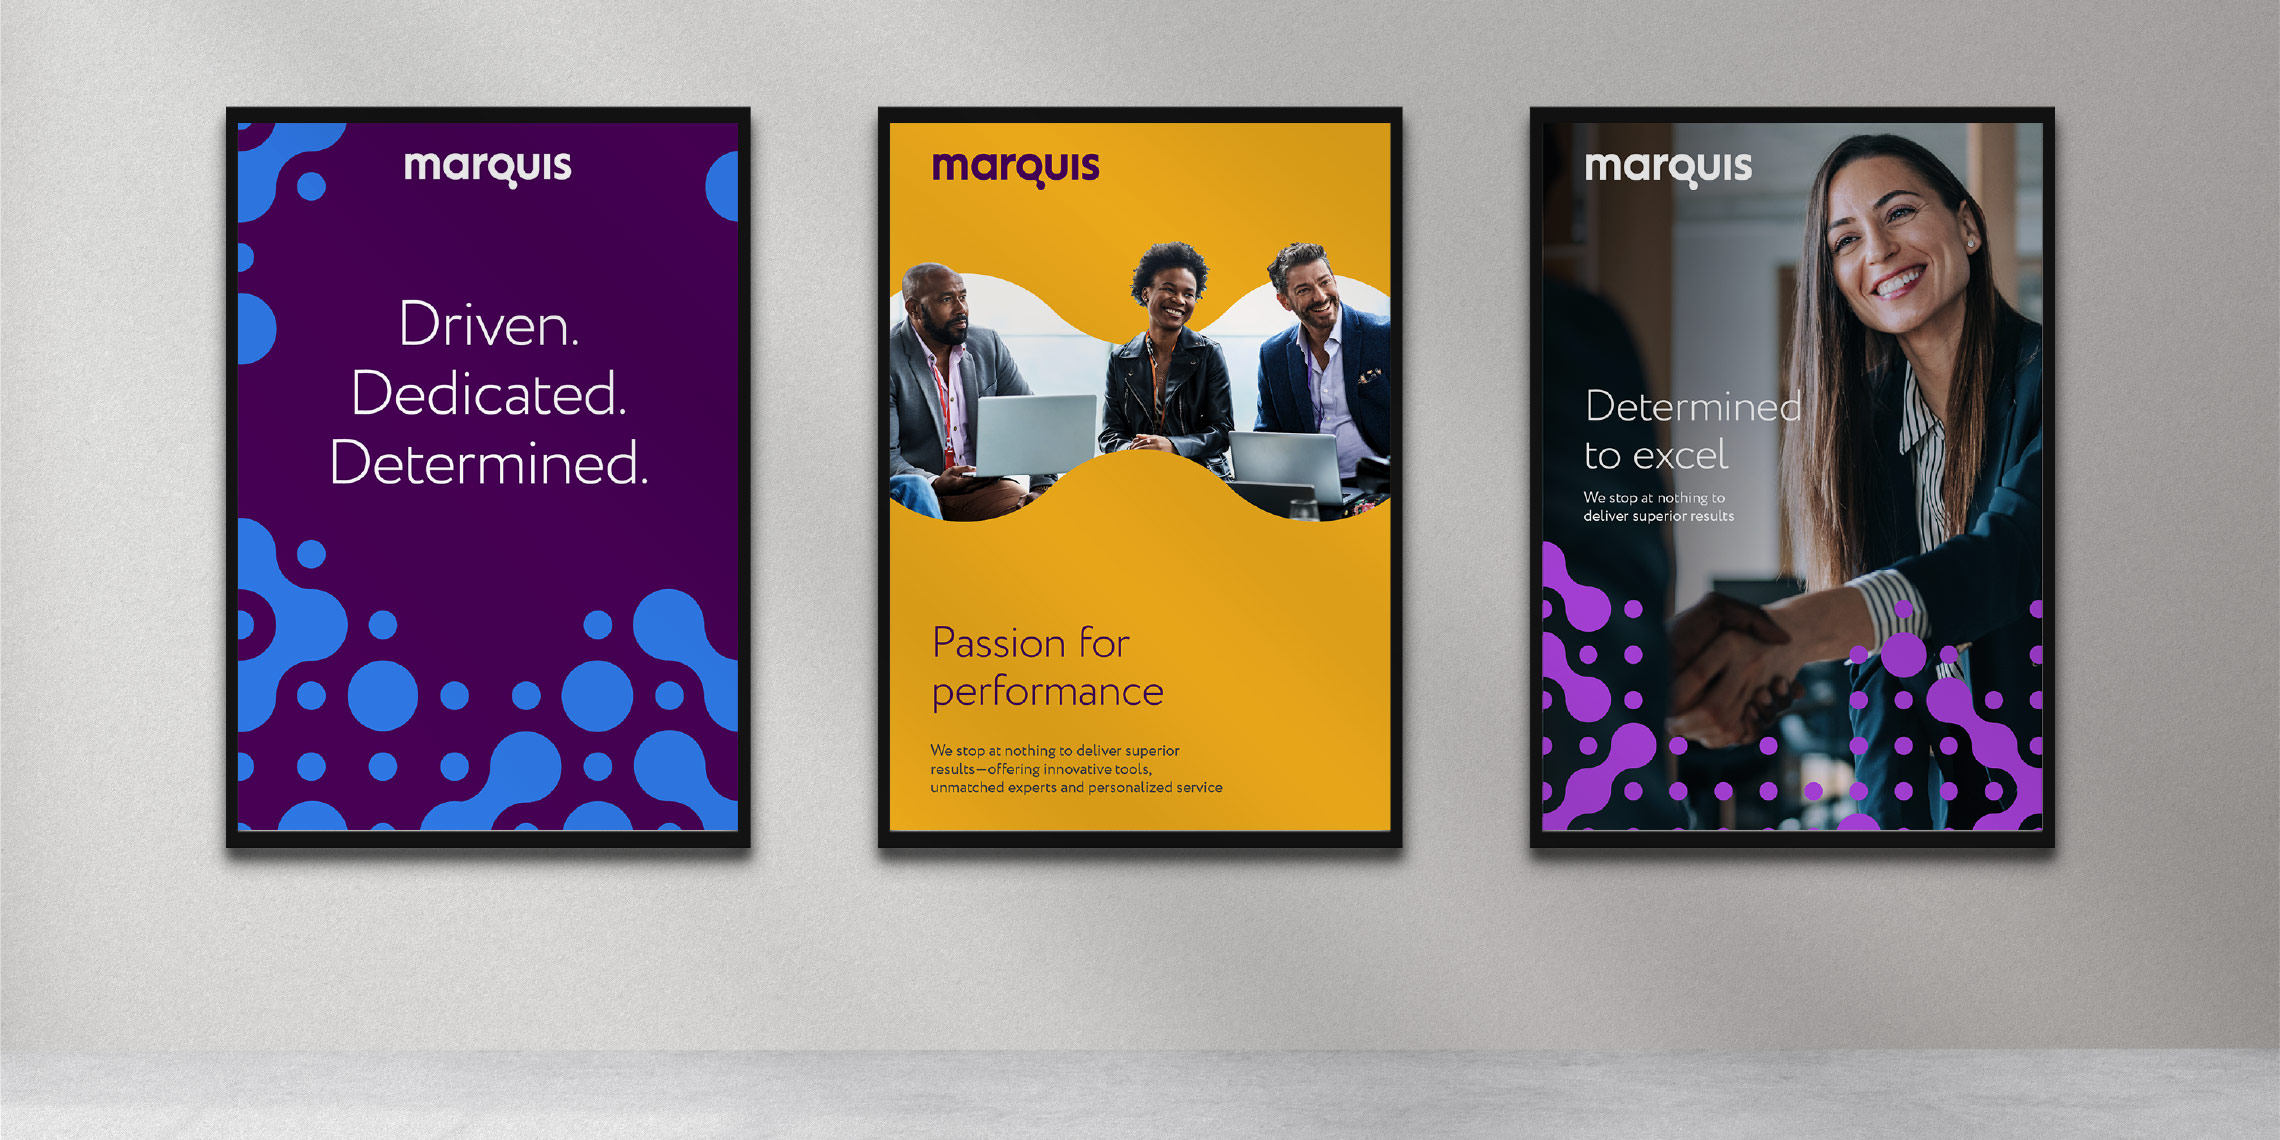 Examples of 3 vertical banners for Marquis showing how to apply the design system